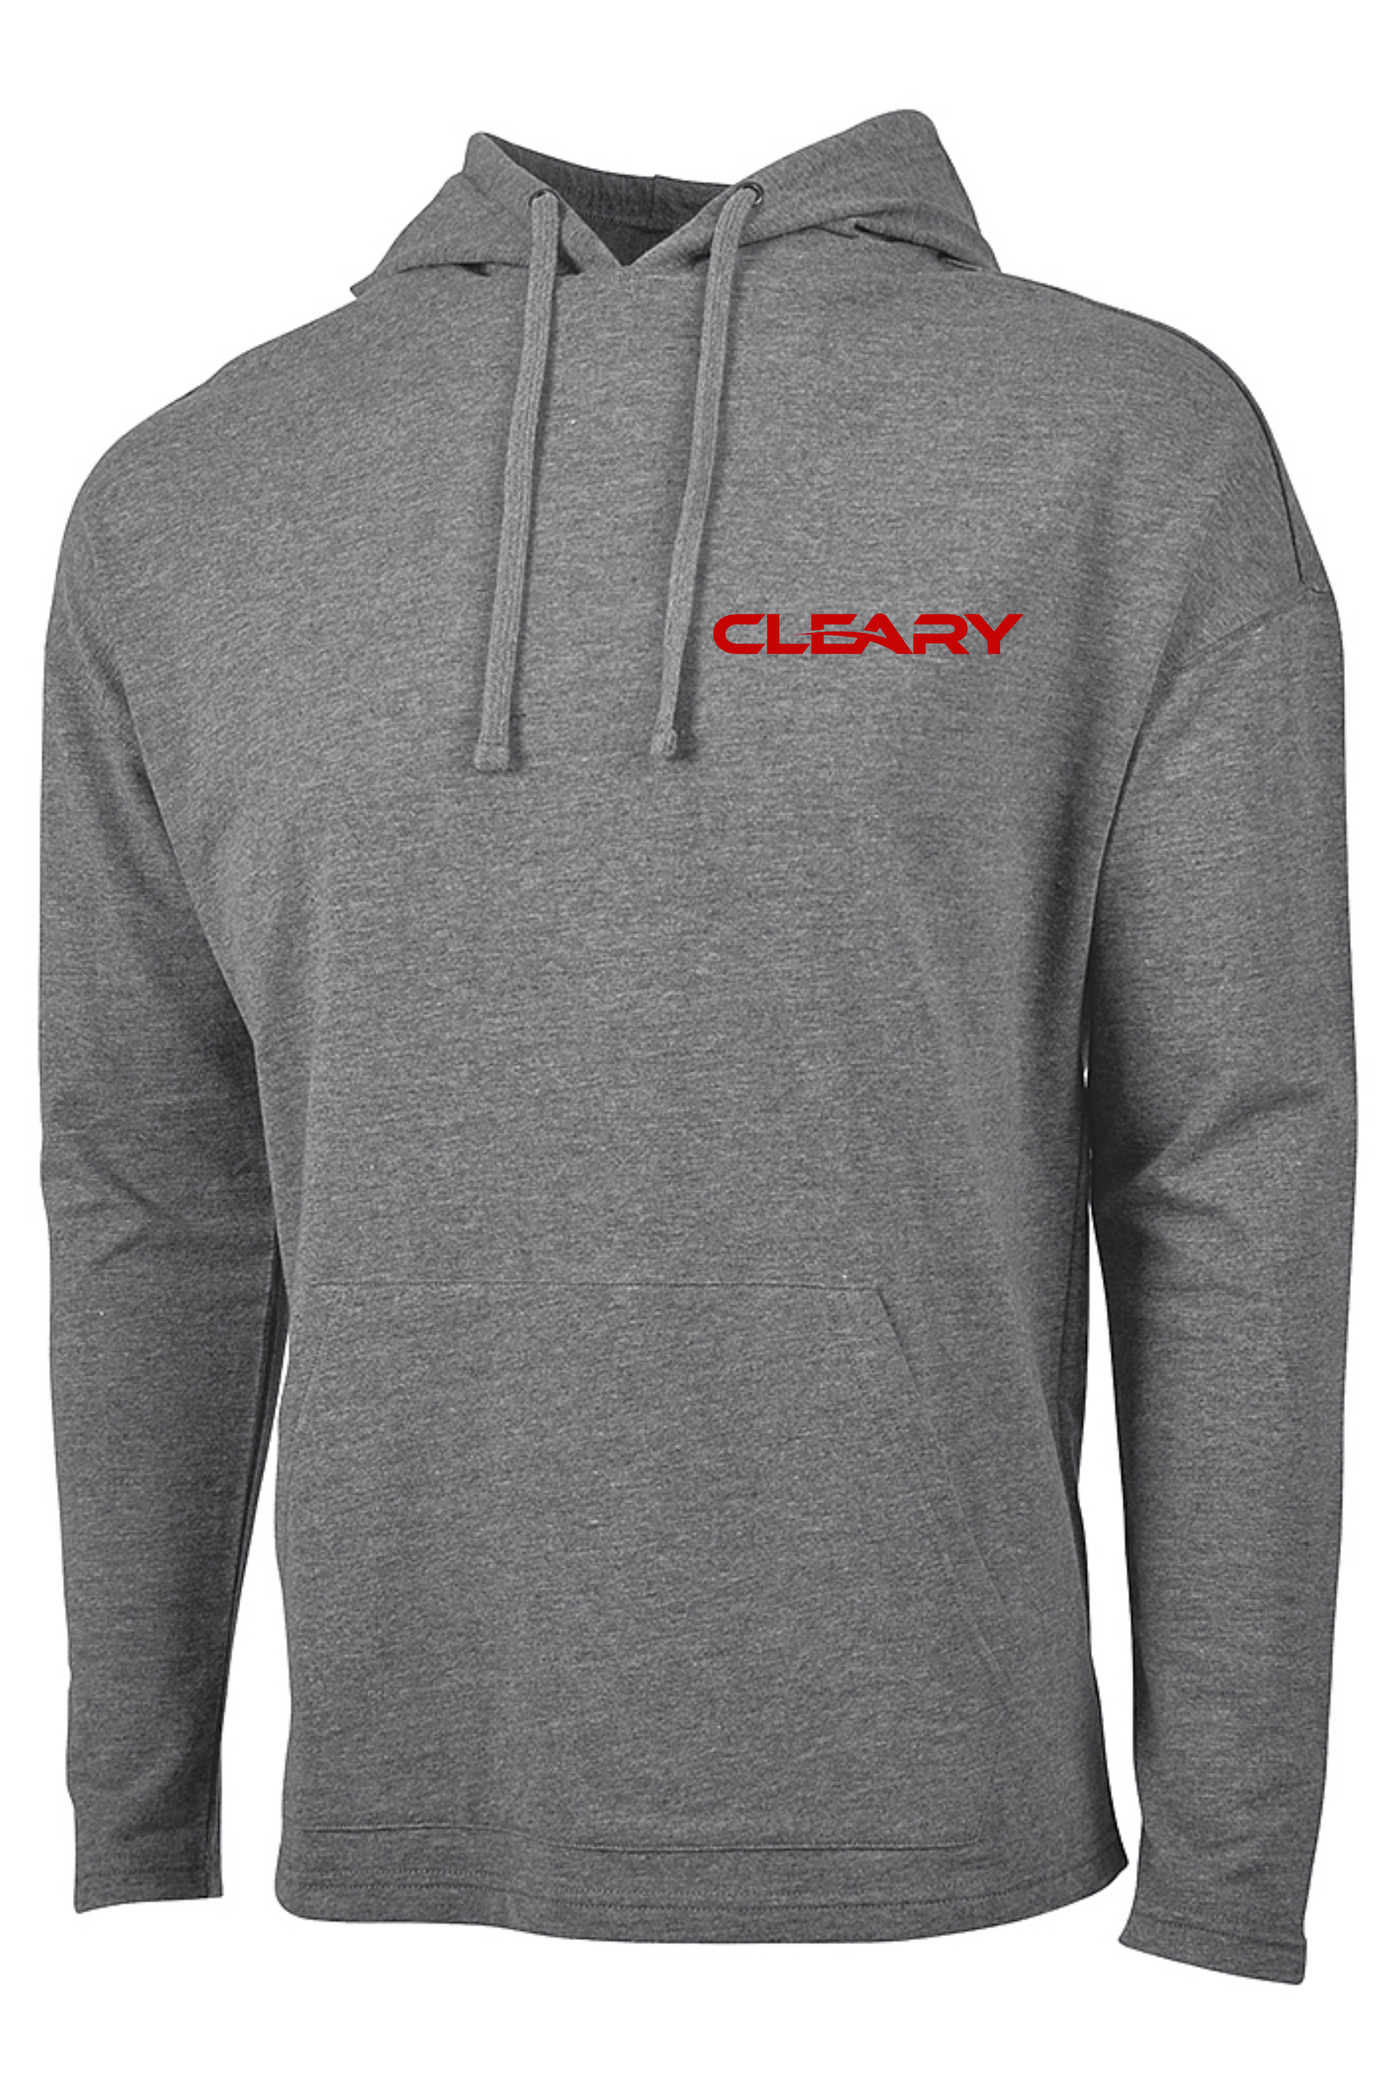 Cleary's Harbor Hoodie Pewter Heather